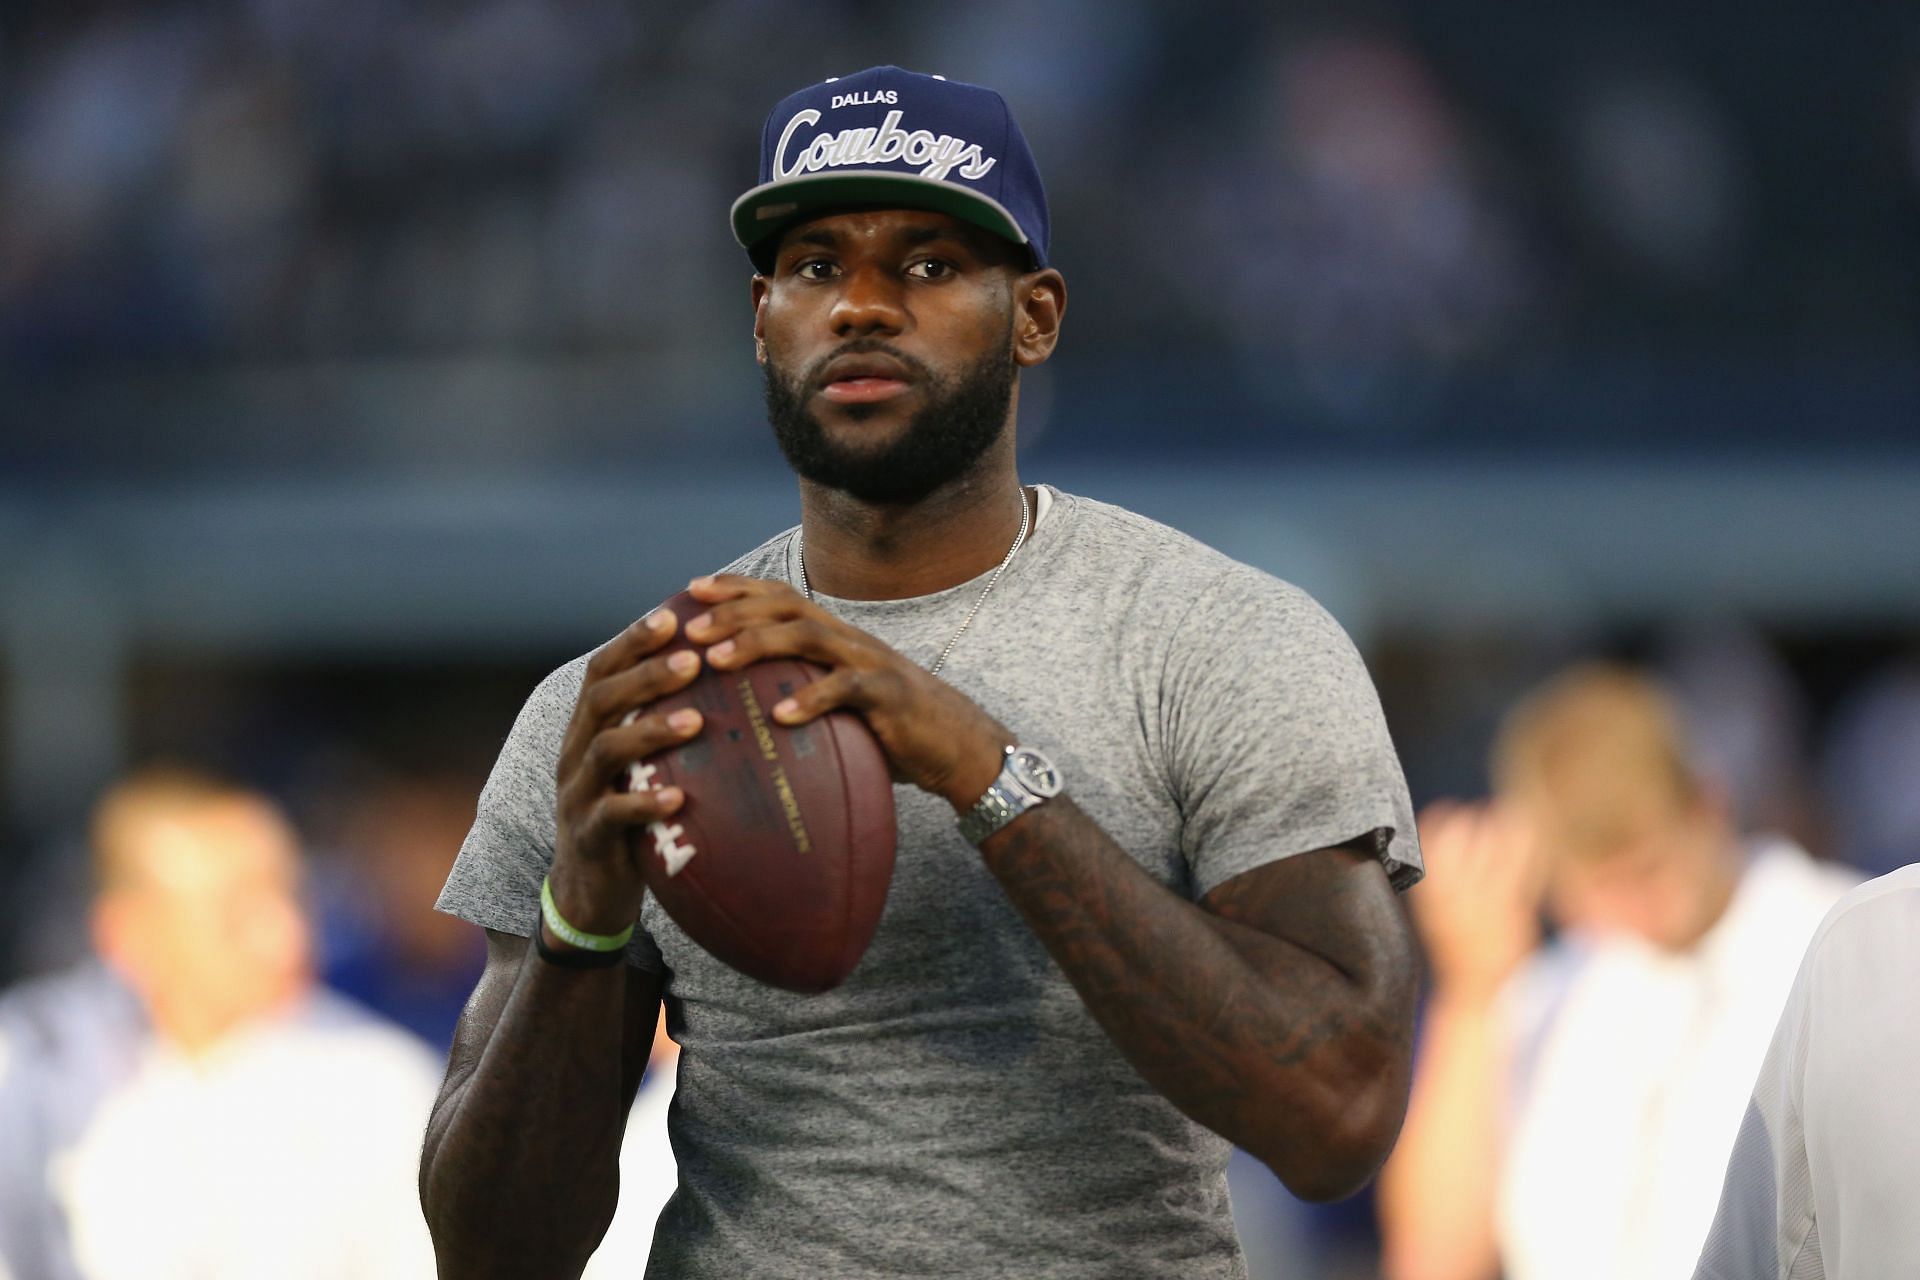 LeBron James is a fan of the Dallas Cowboys.